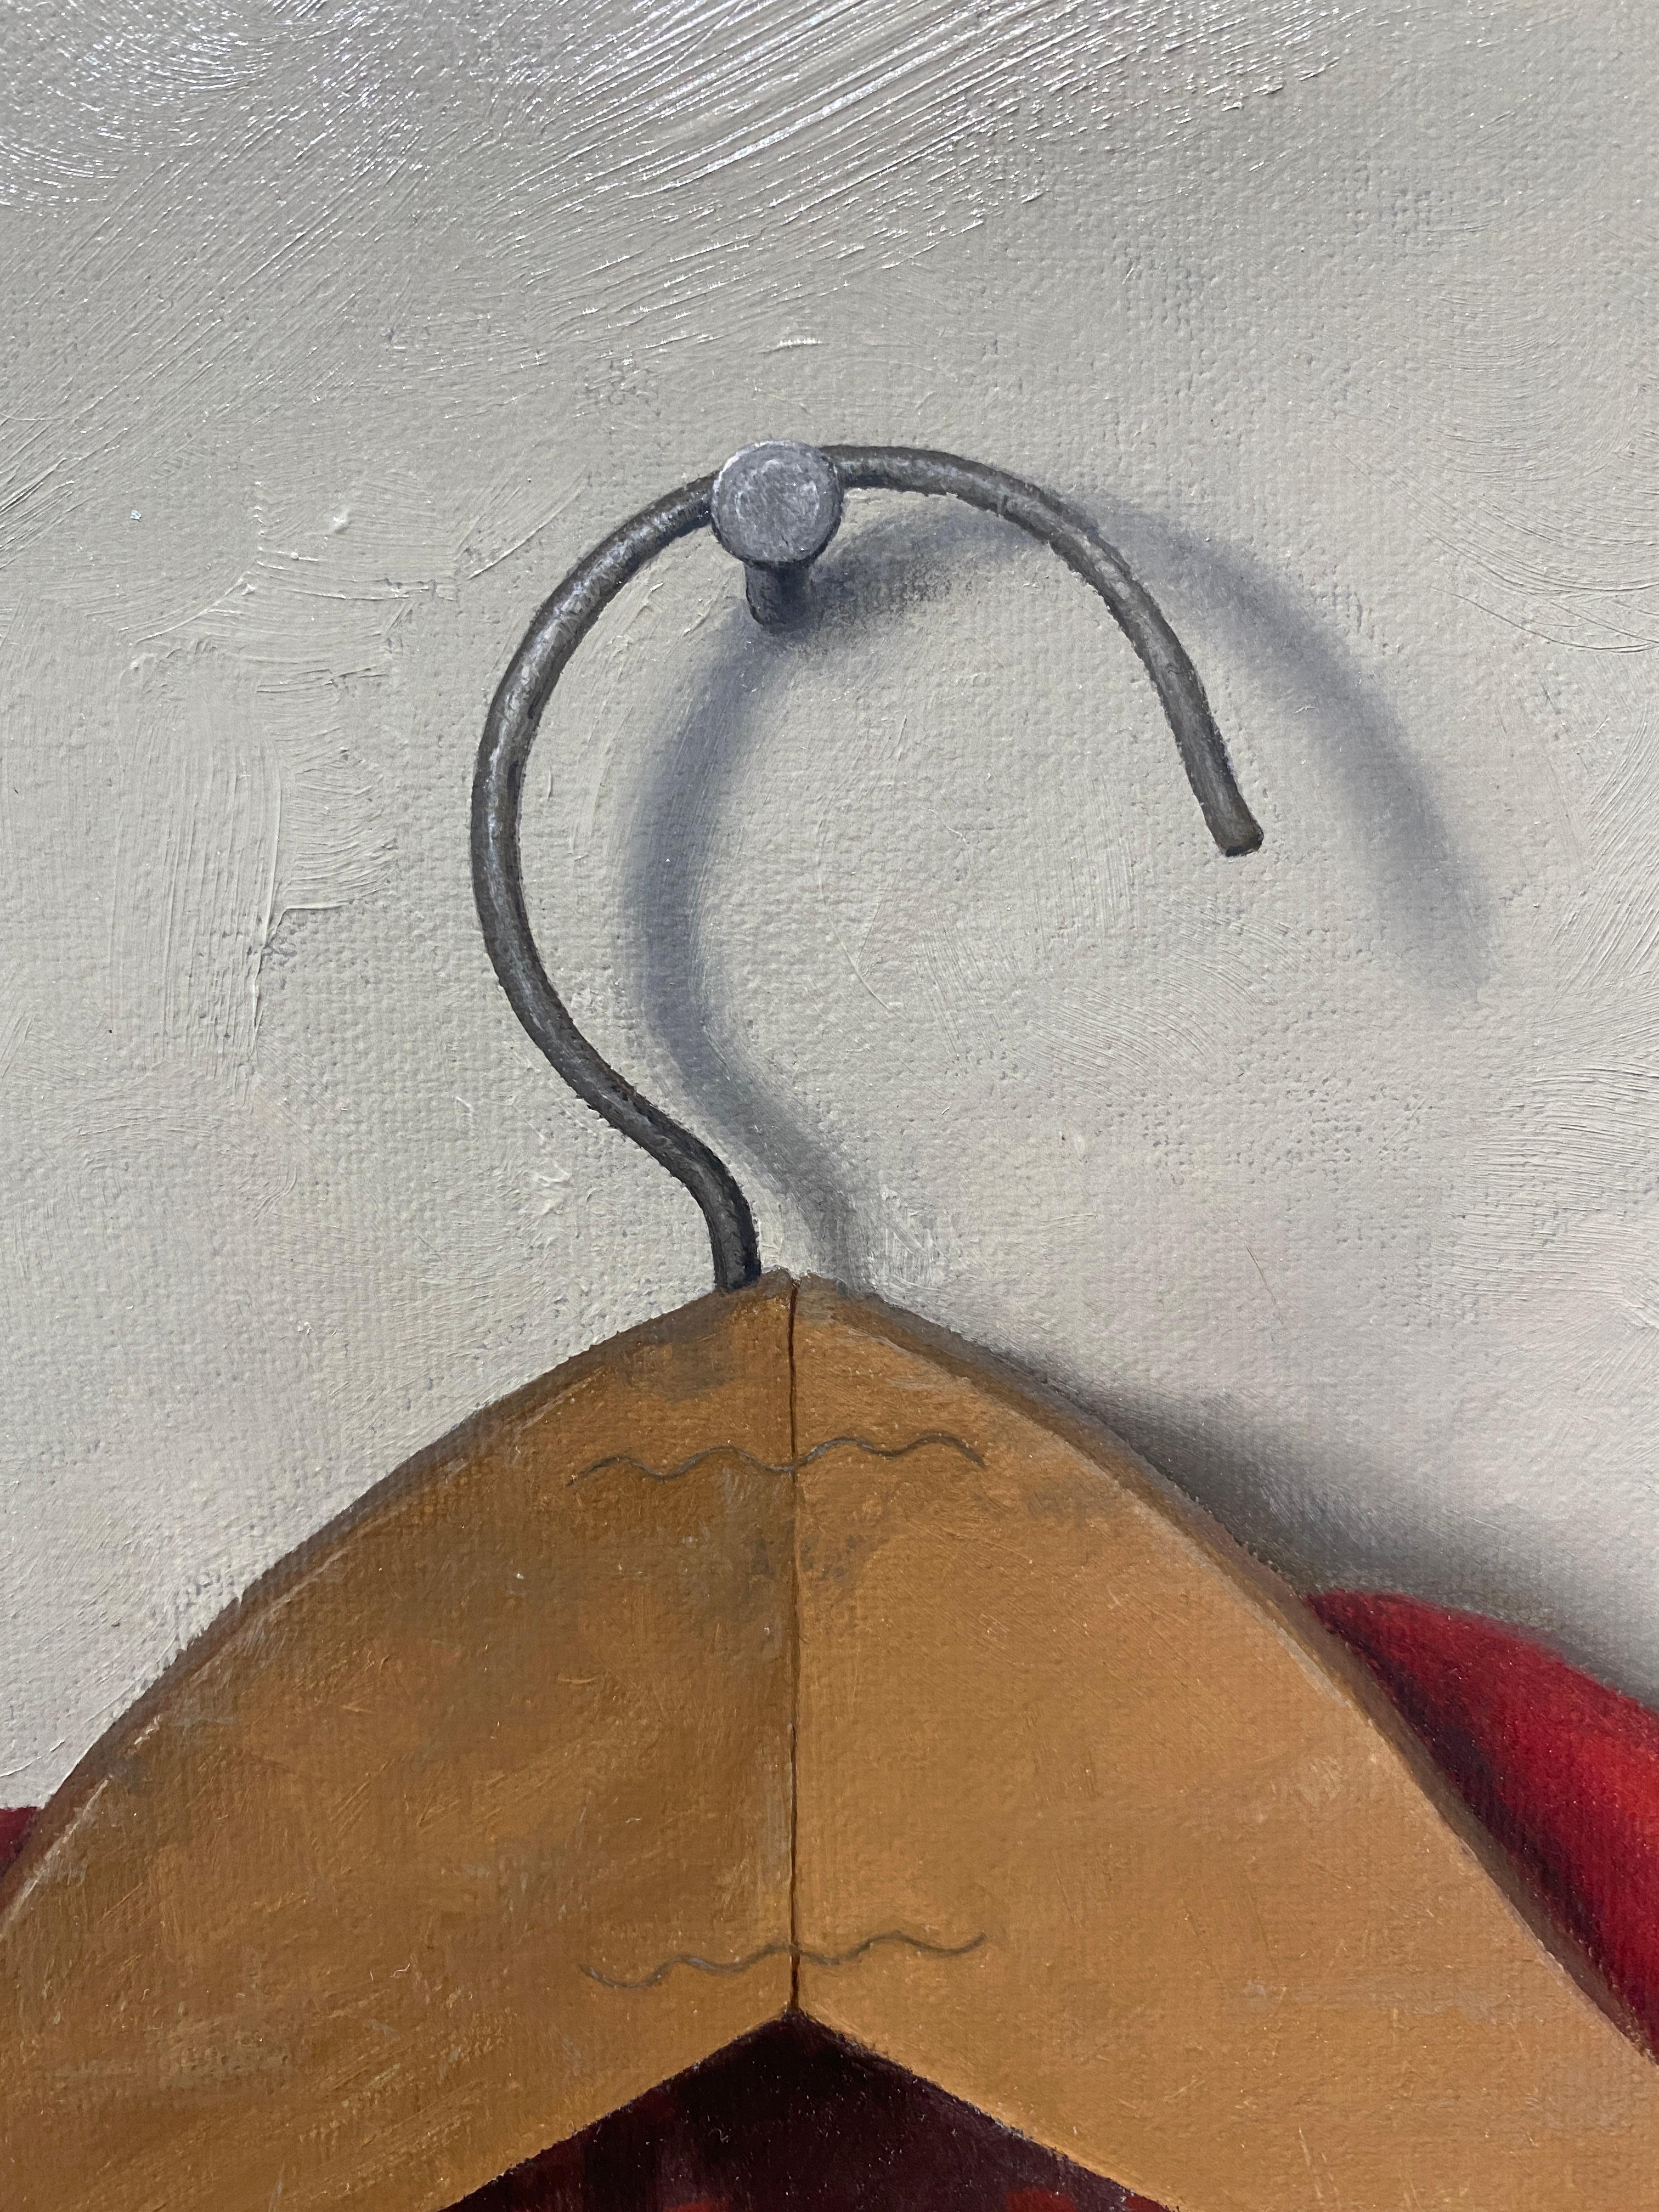 An oil painting of a vintage flannel zip-up. A classic red tartan plaid jacket, on a wooden hanger, hanging from a single nail, against a grey backdrop. Brushstrokes can be seen in the gray of the background, but are harder to make out on the